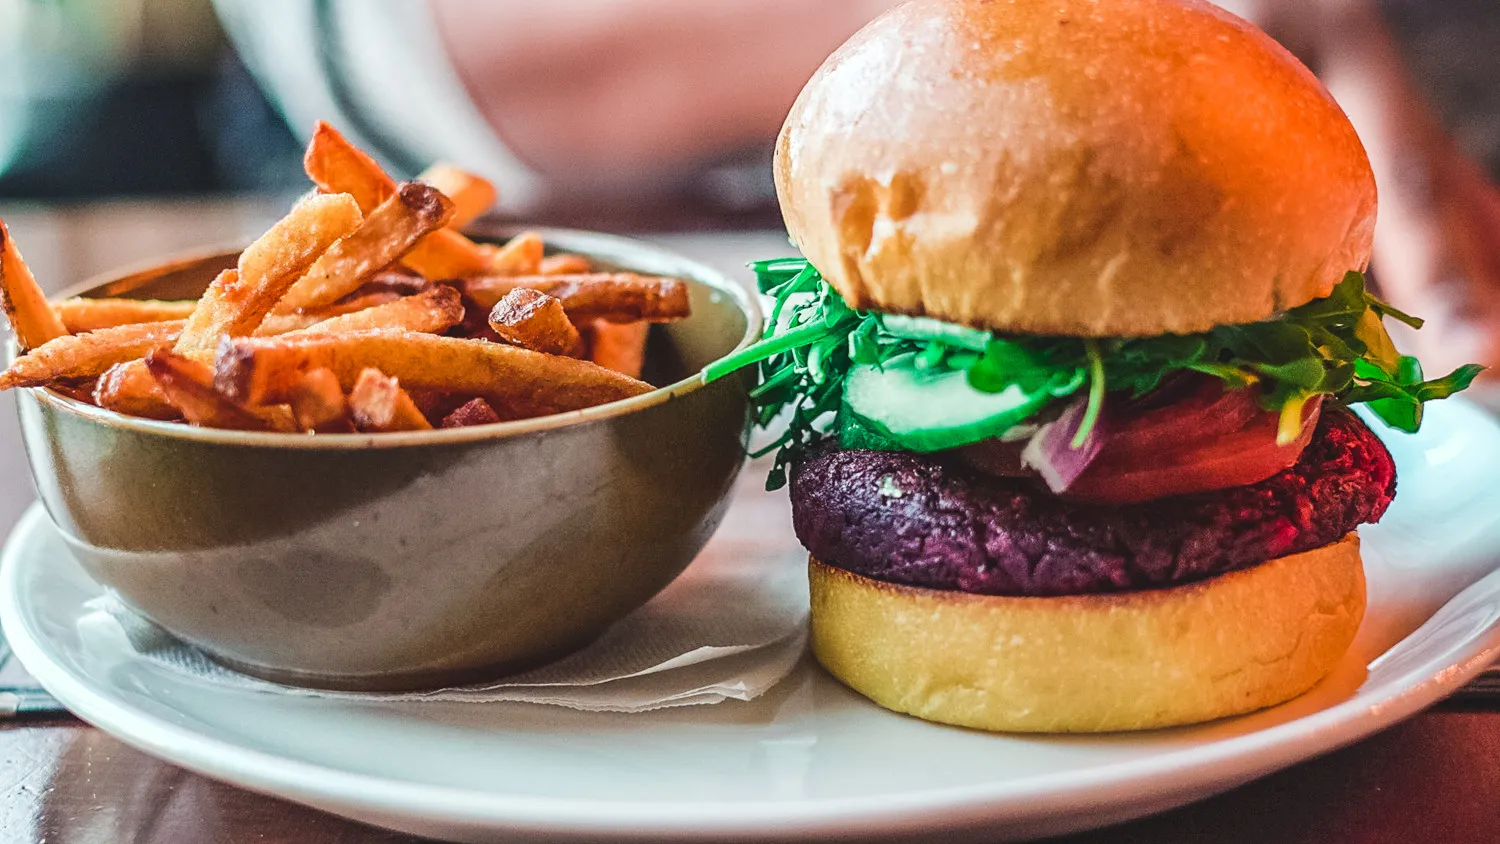 A plant-based meal consisting of a veggie burger and fries